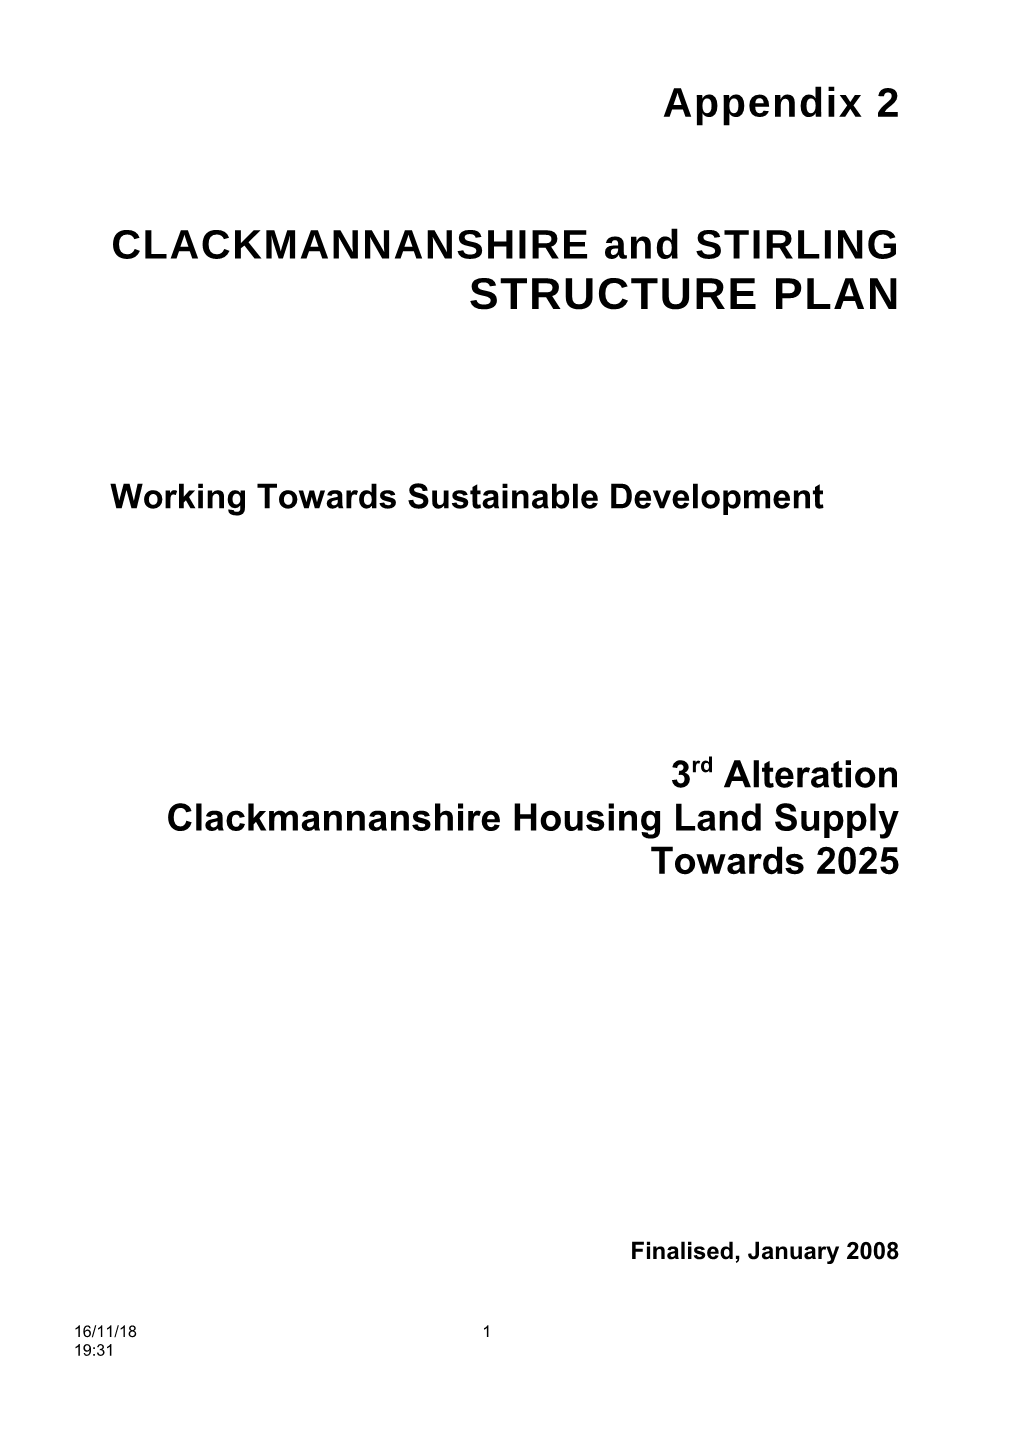 Appendix 2 Clacks and Stirling Structure Plan 3Rd Alteration